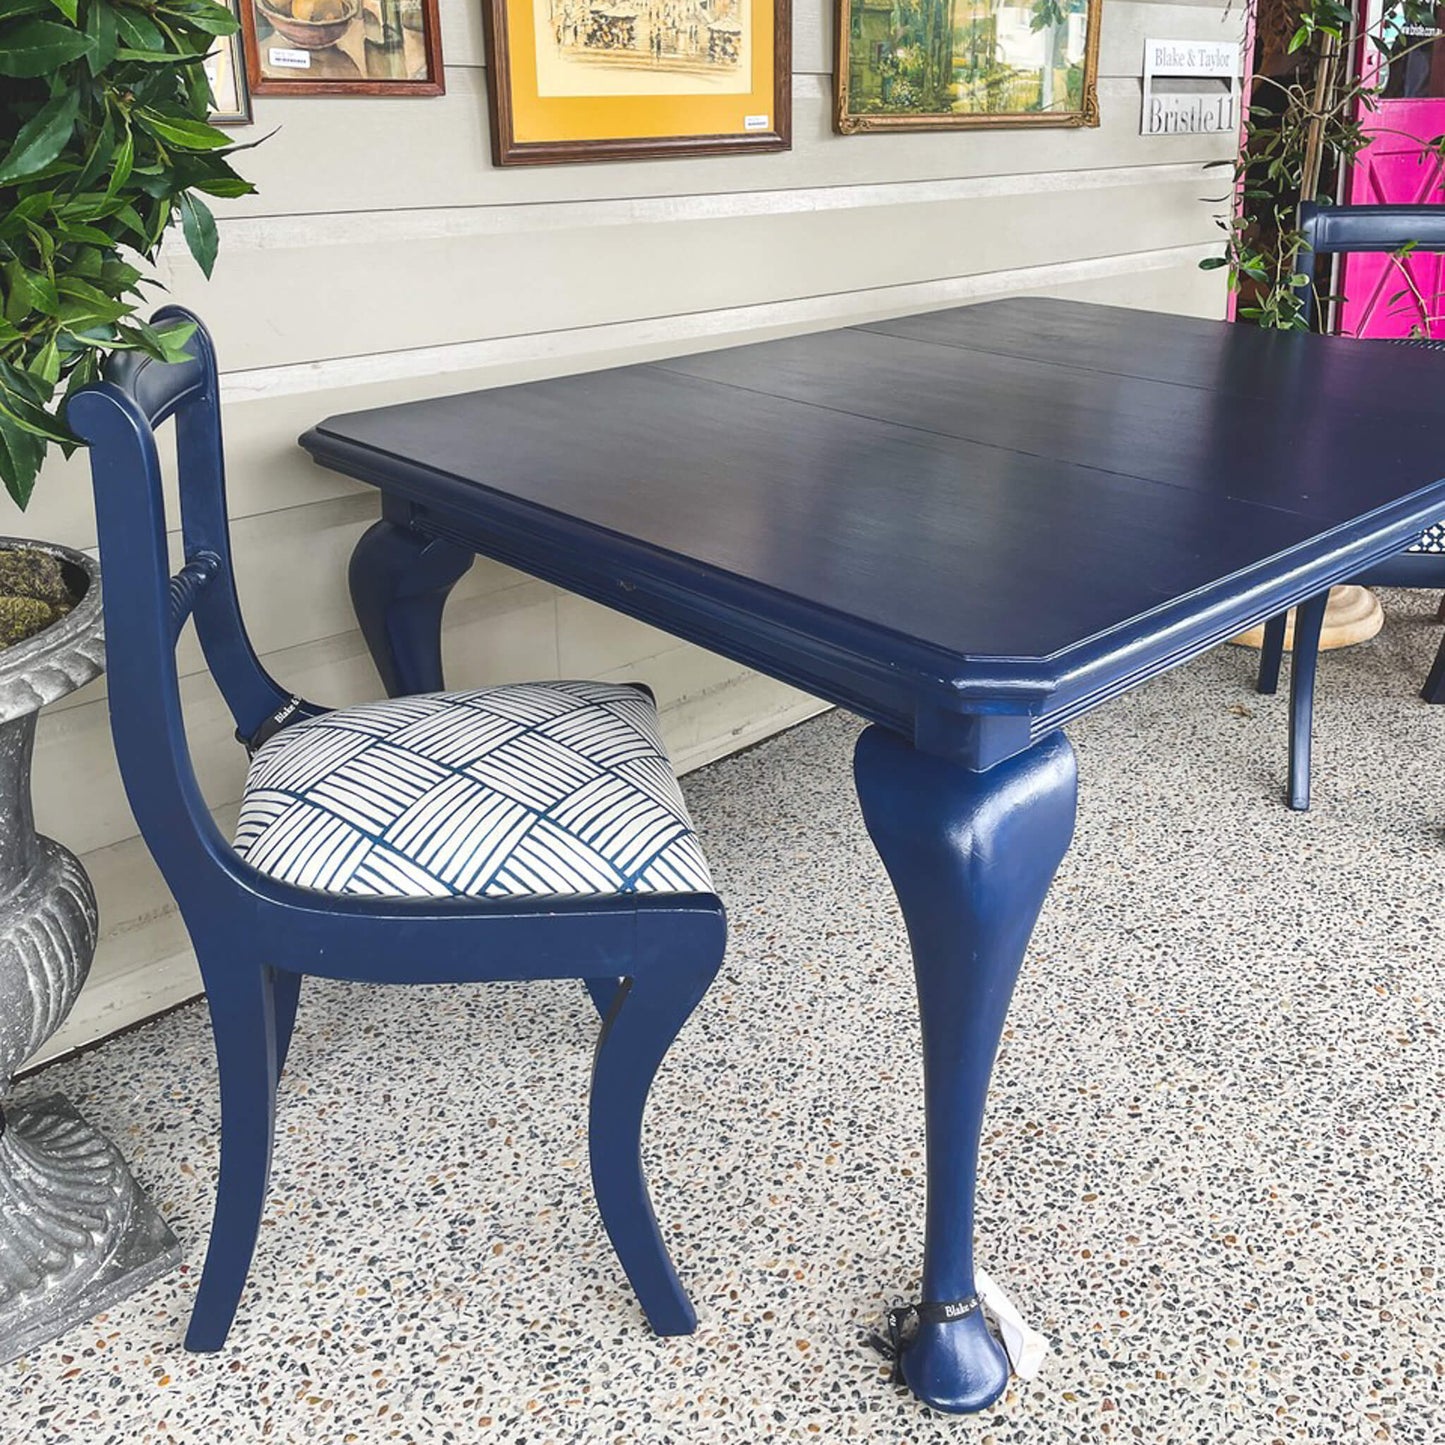 Vintage table and chairs painted with Blake & Taylor Ink Navy Chalk Furniture Paint